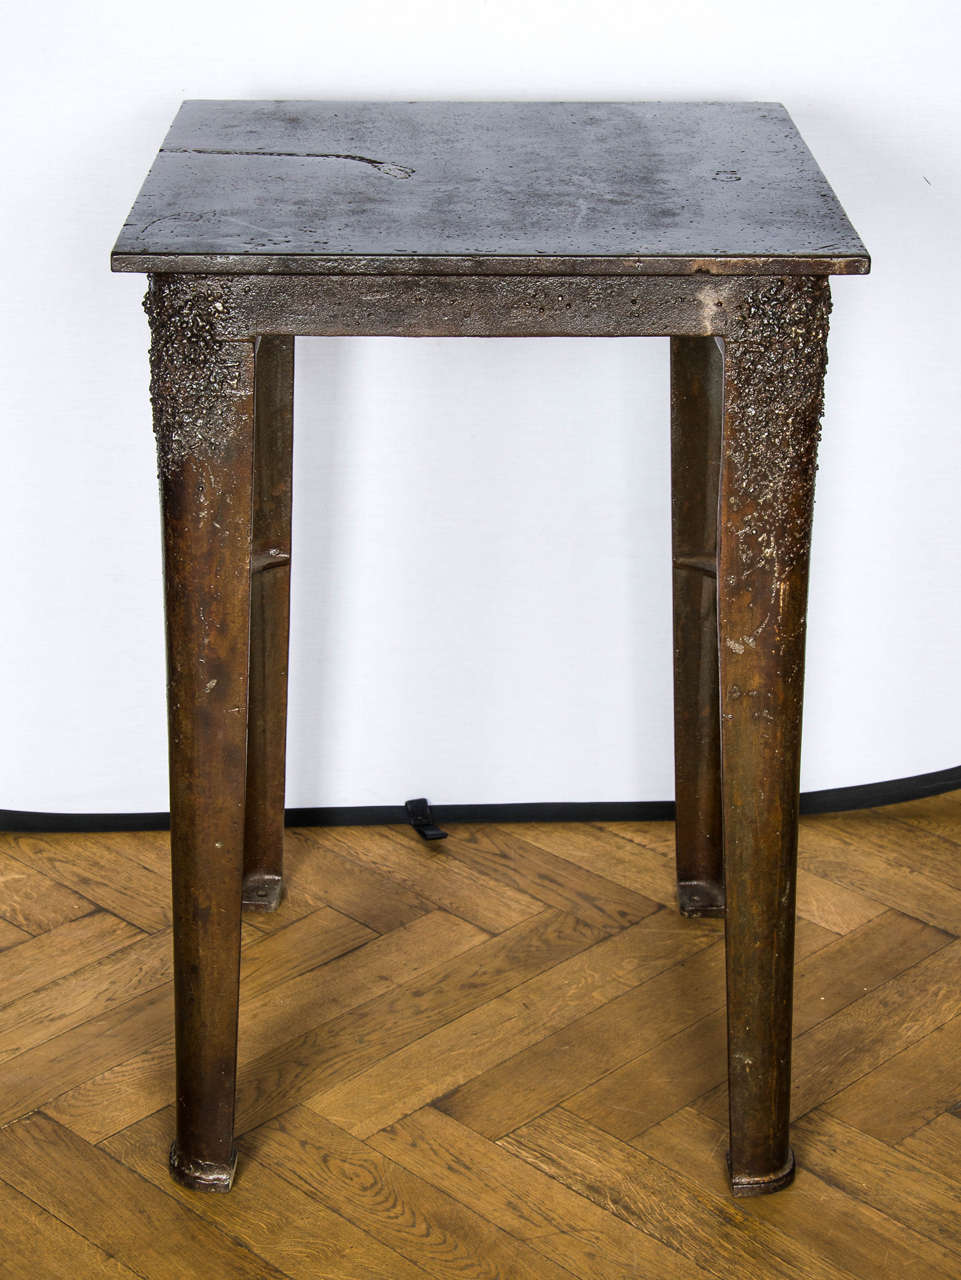 A vintage industrial workbench table in iron. This substantial, tall table has a vintage patina with some characterful markings from its previous working life.